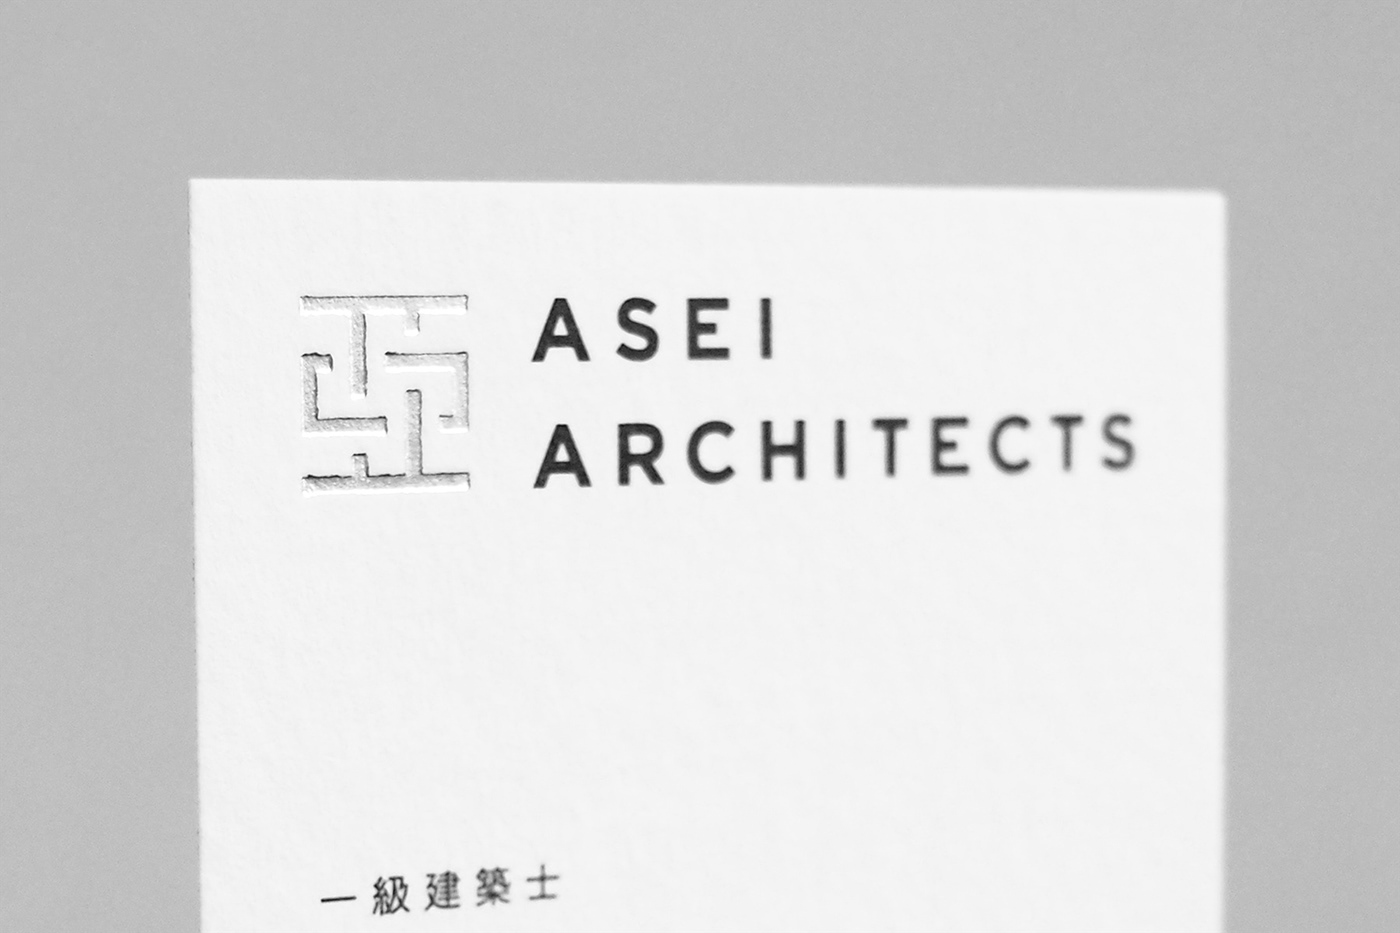 architecture kanji Chinese Character asia 建築事務所 typography   タイポグラフィ 漢字 漢字ロゴ